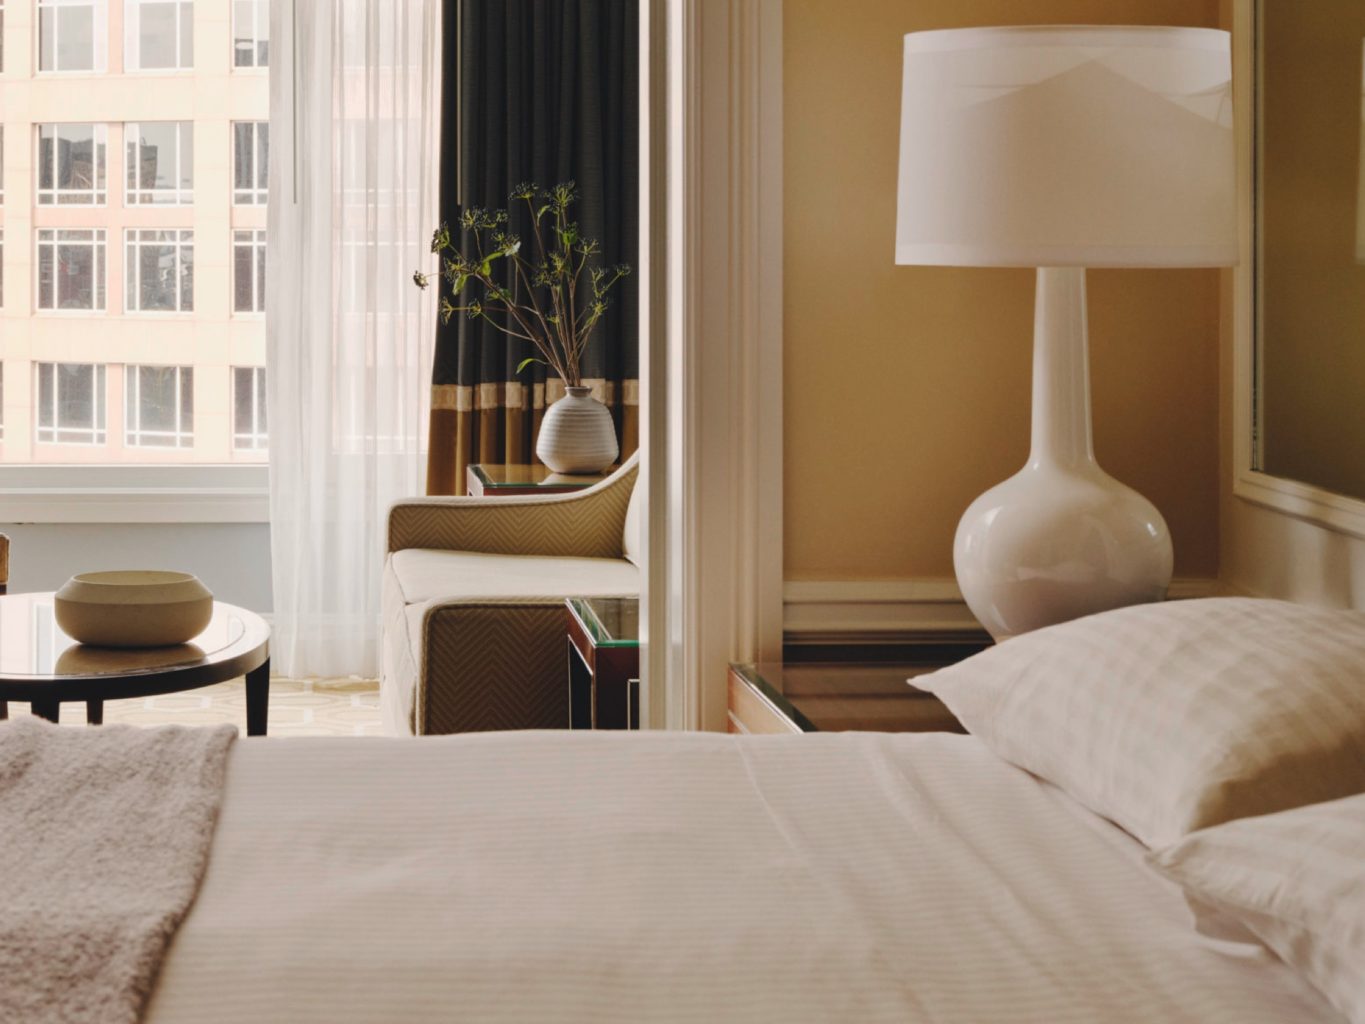 Boston Harbor Hotel to Expand Partnership with INTELITY’s Smart Room Offering Header image